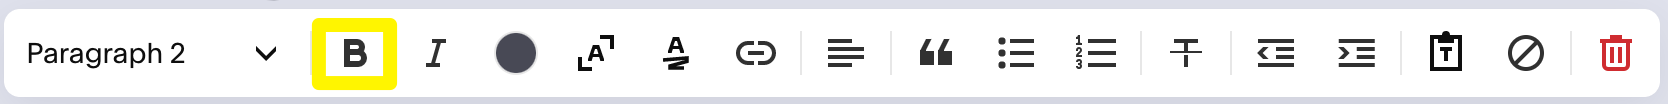 Bold_icon_Squarespace_text_toolbar_large_letter_B.png